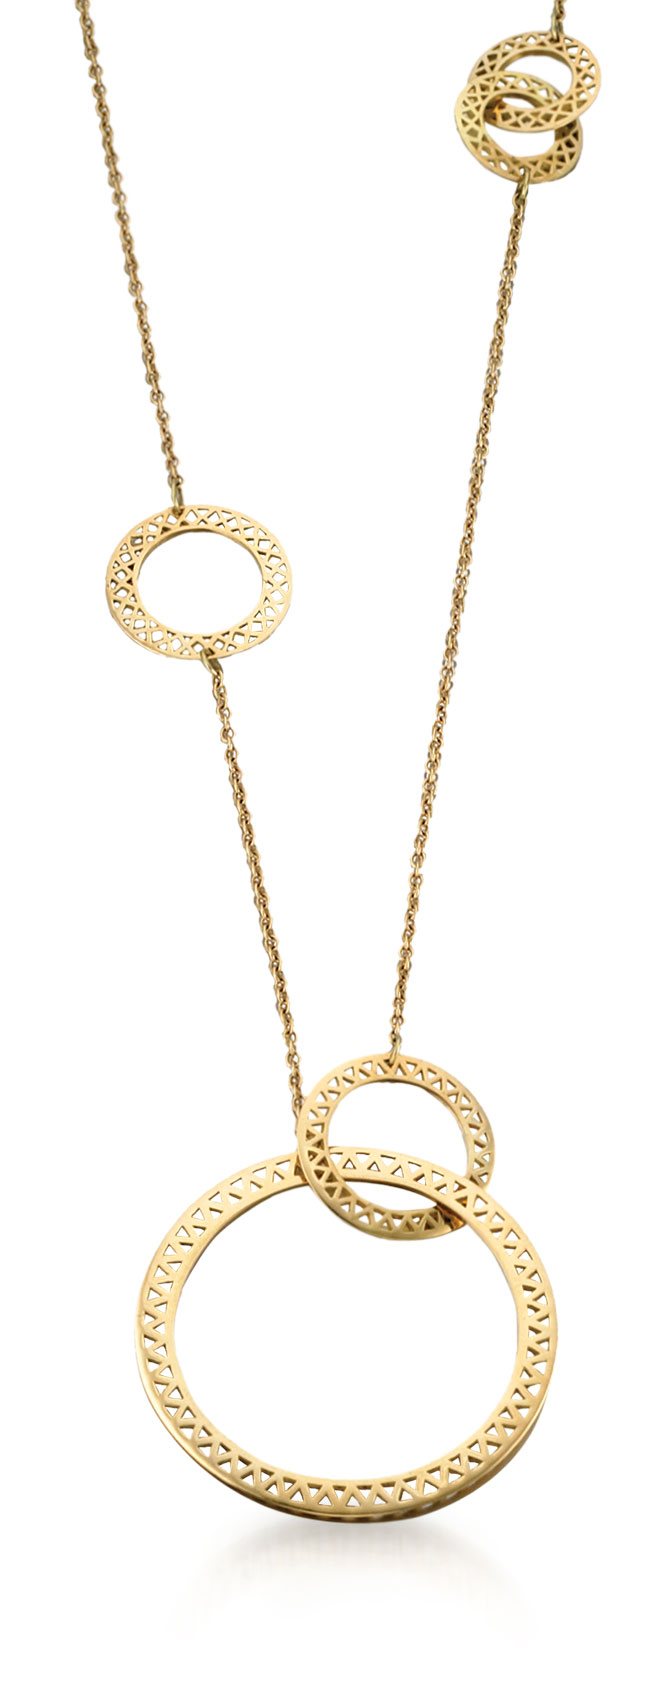 Crownwork disc necklace from Ray Griffiths